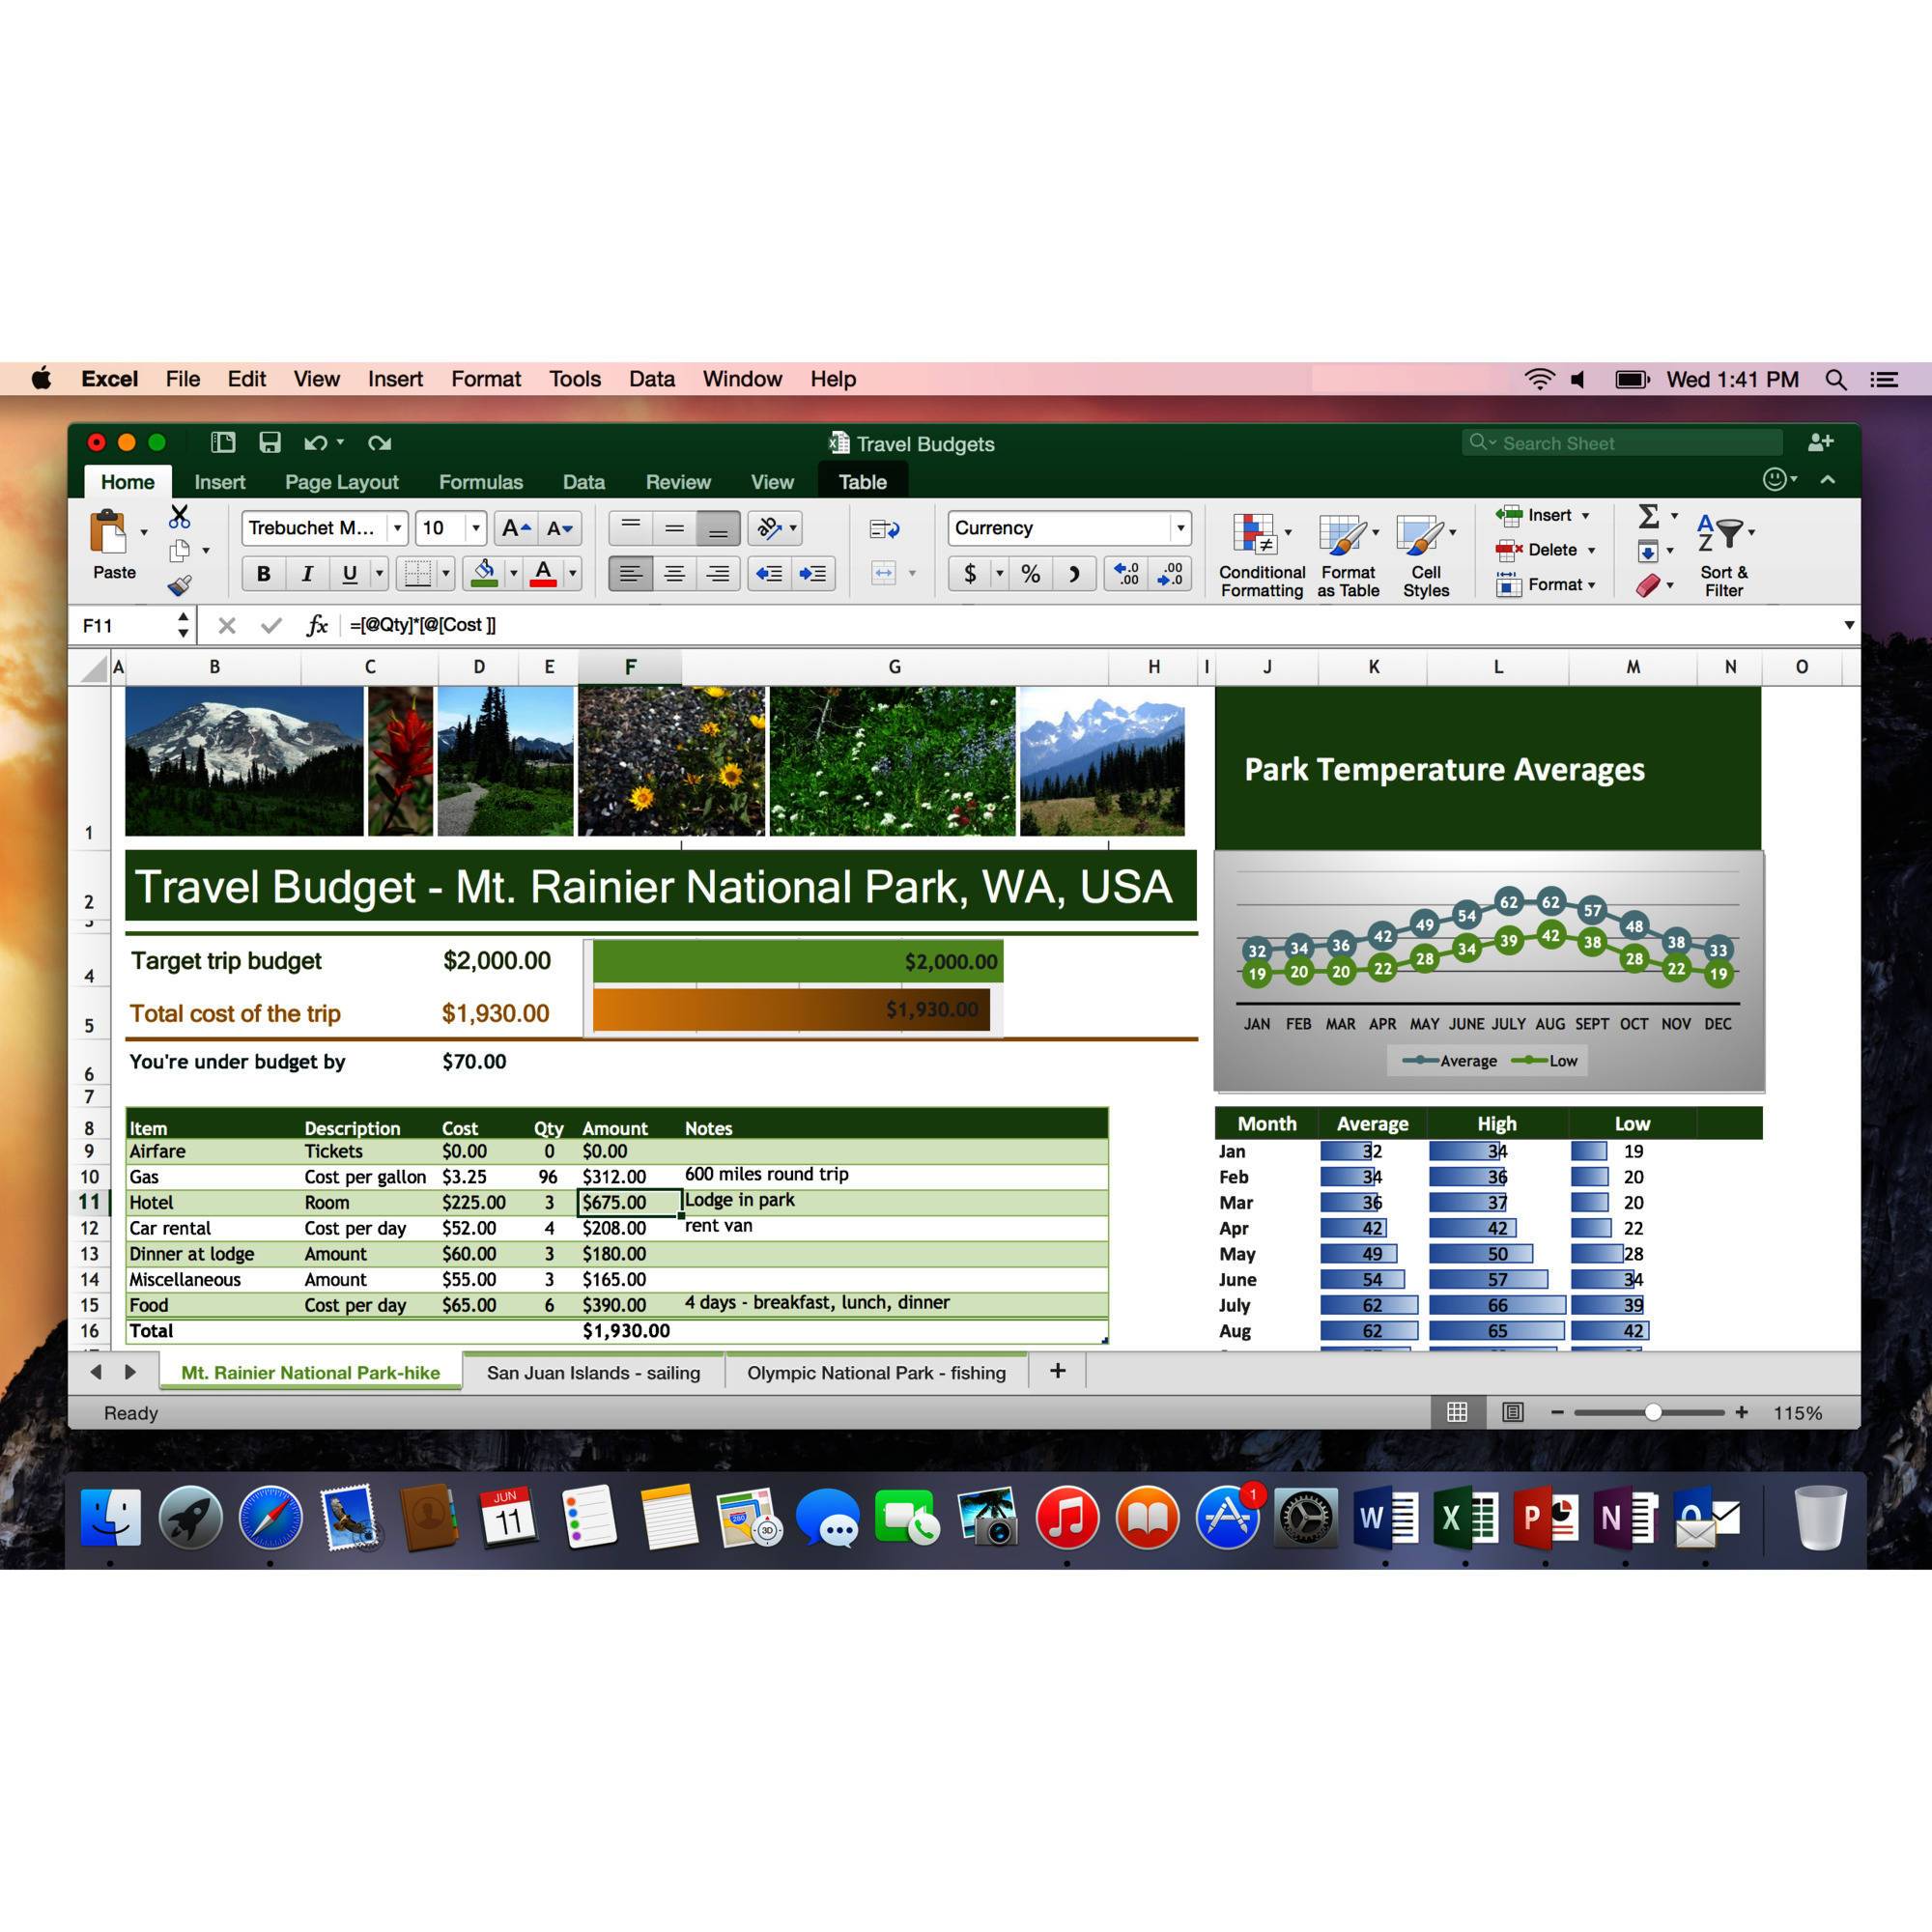 microsoft office for mac student 2016